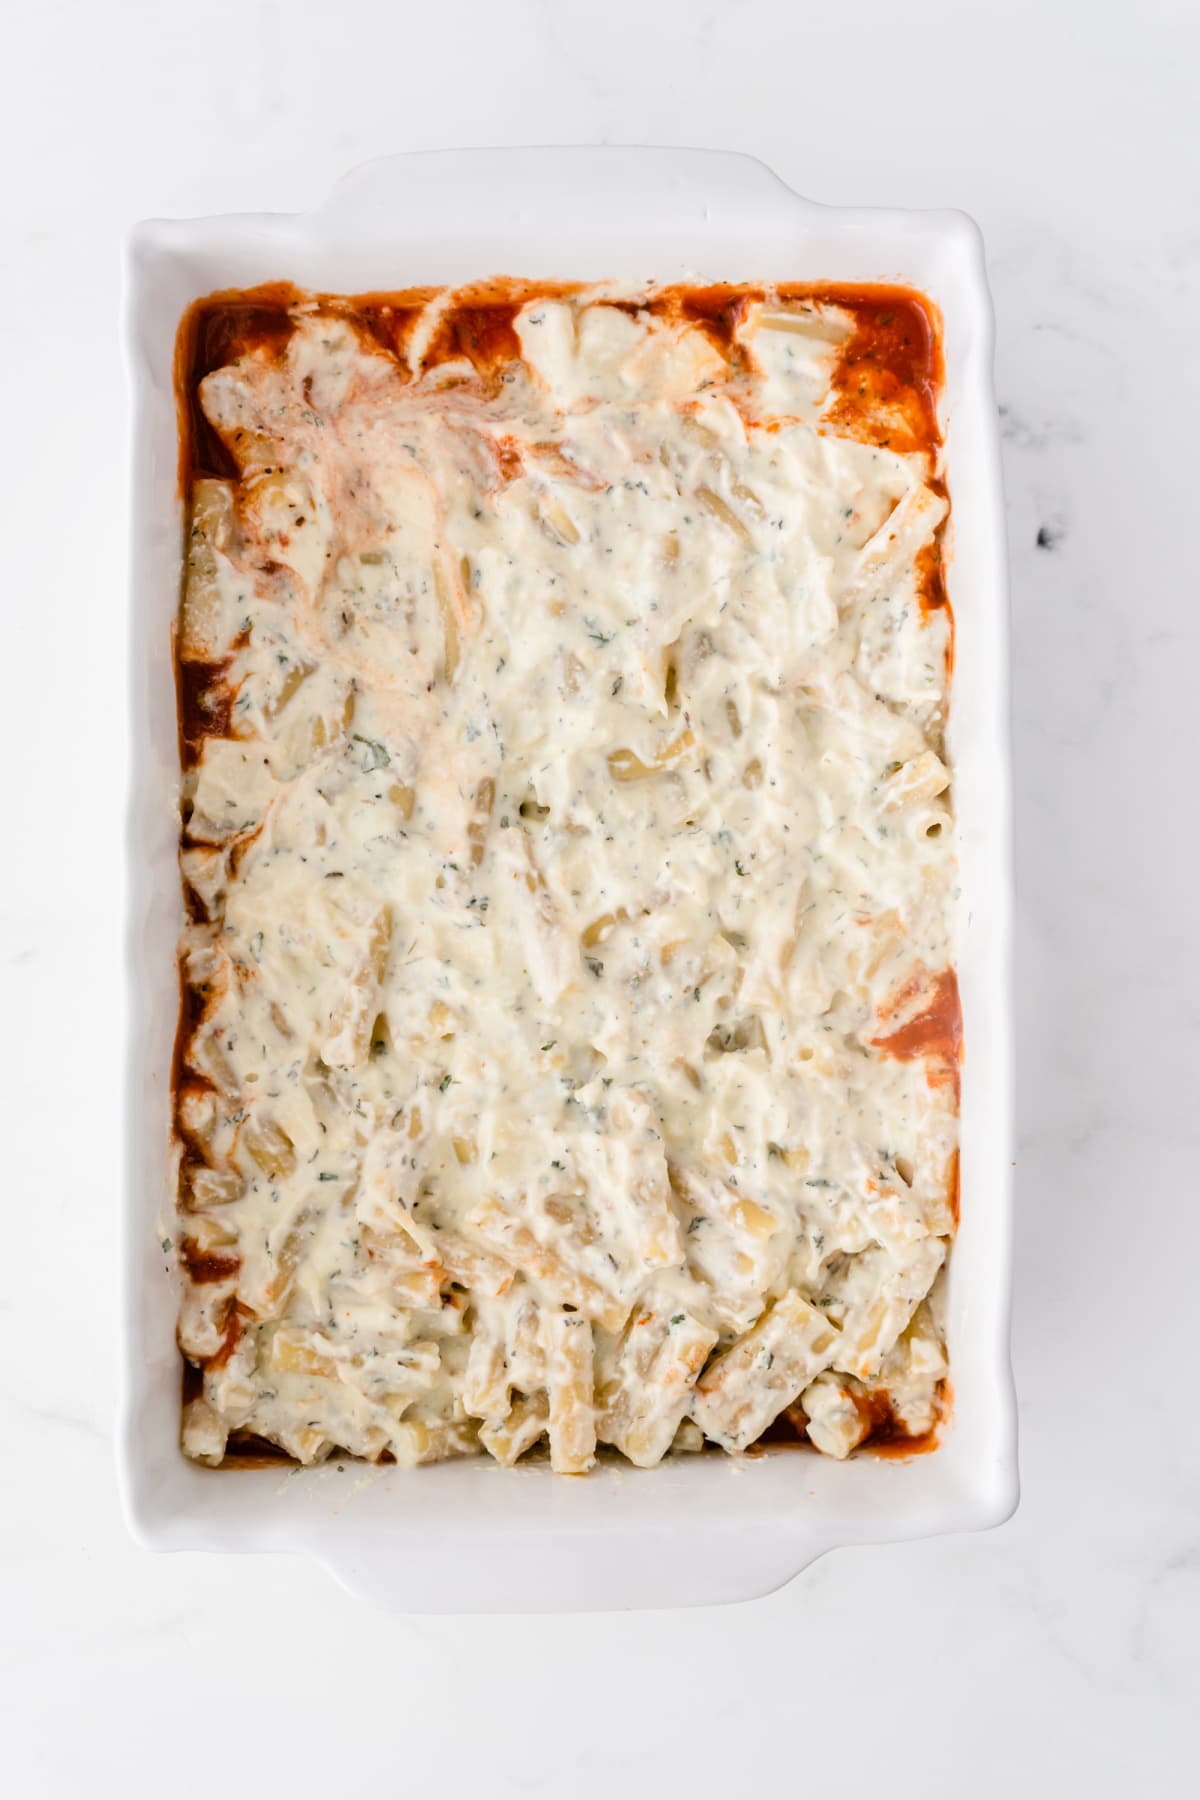 Layers of tomato sauce, pasta and cheese sauce in pan